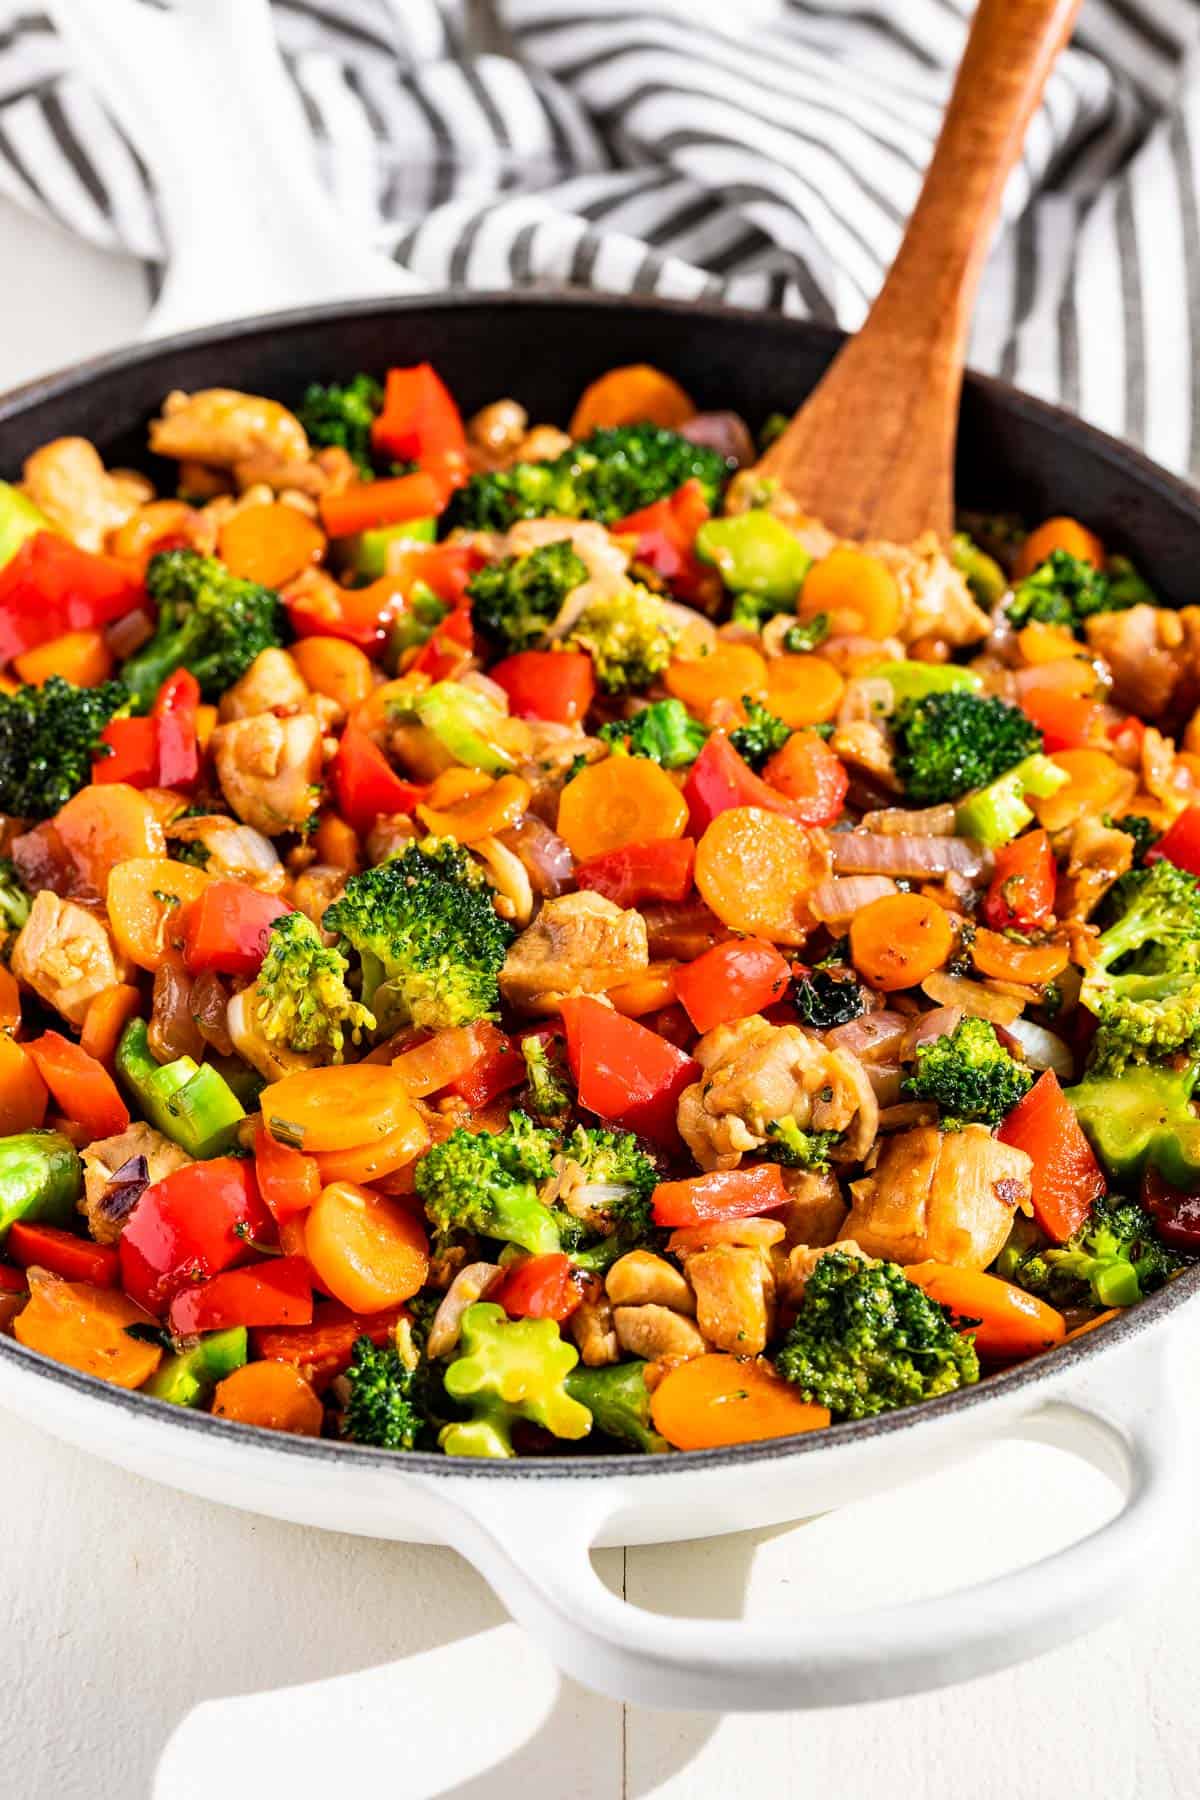 Honey Garlic Chicken Stir Fry and vegetables in a white skillet with a wood spoon in it on a white background.